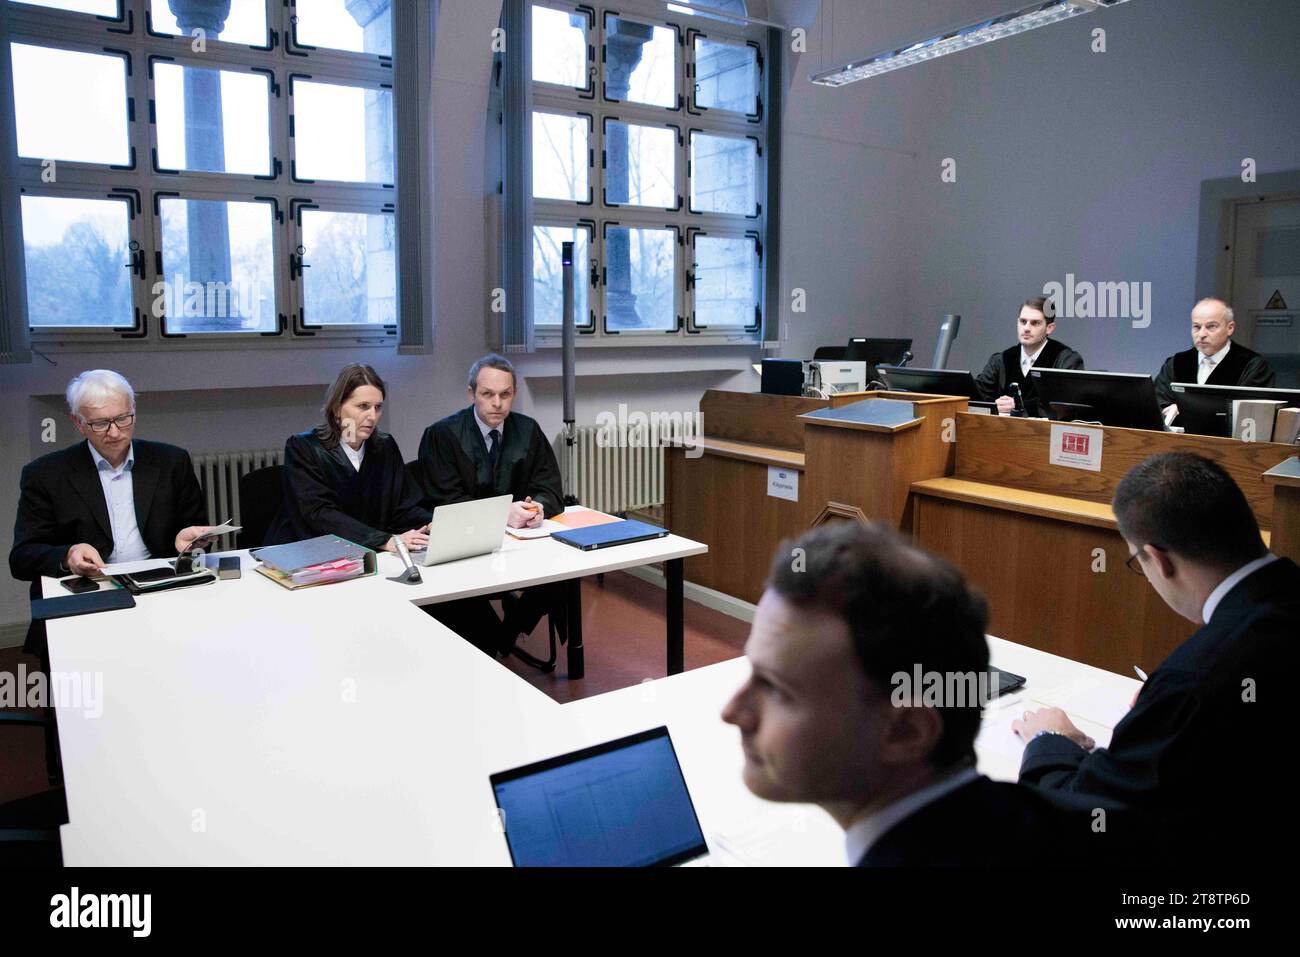 21 November 2023, Berlin: Jürgen Resch (l-r), Managing Director of Deutsche Umwelthilfe (DUH), Juliane Schütt, lawyer, Tobias Bulling, lawyer, and Holger Thiel (r), judge in the case, sit in the courtroom before the start of the hearing of DUH's landmark lawsuit against US internet giant Meta (Facebook, Instagram) at Berlin Regional Court. The lawsuit is based on threats of violence and murder in public Facebook groups. Resch is demanding that the Facebook parent company close certain groups and is attempting to enforce this with a model lawsuit. Photo: Carsten Koall/dpa Stock Photo